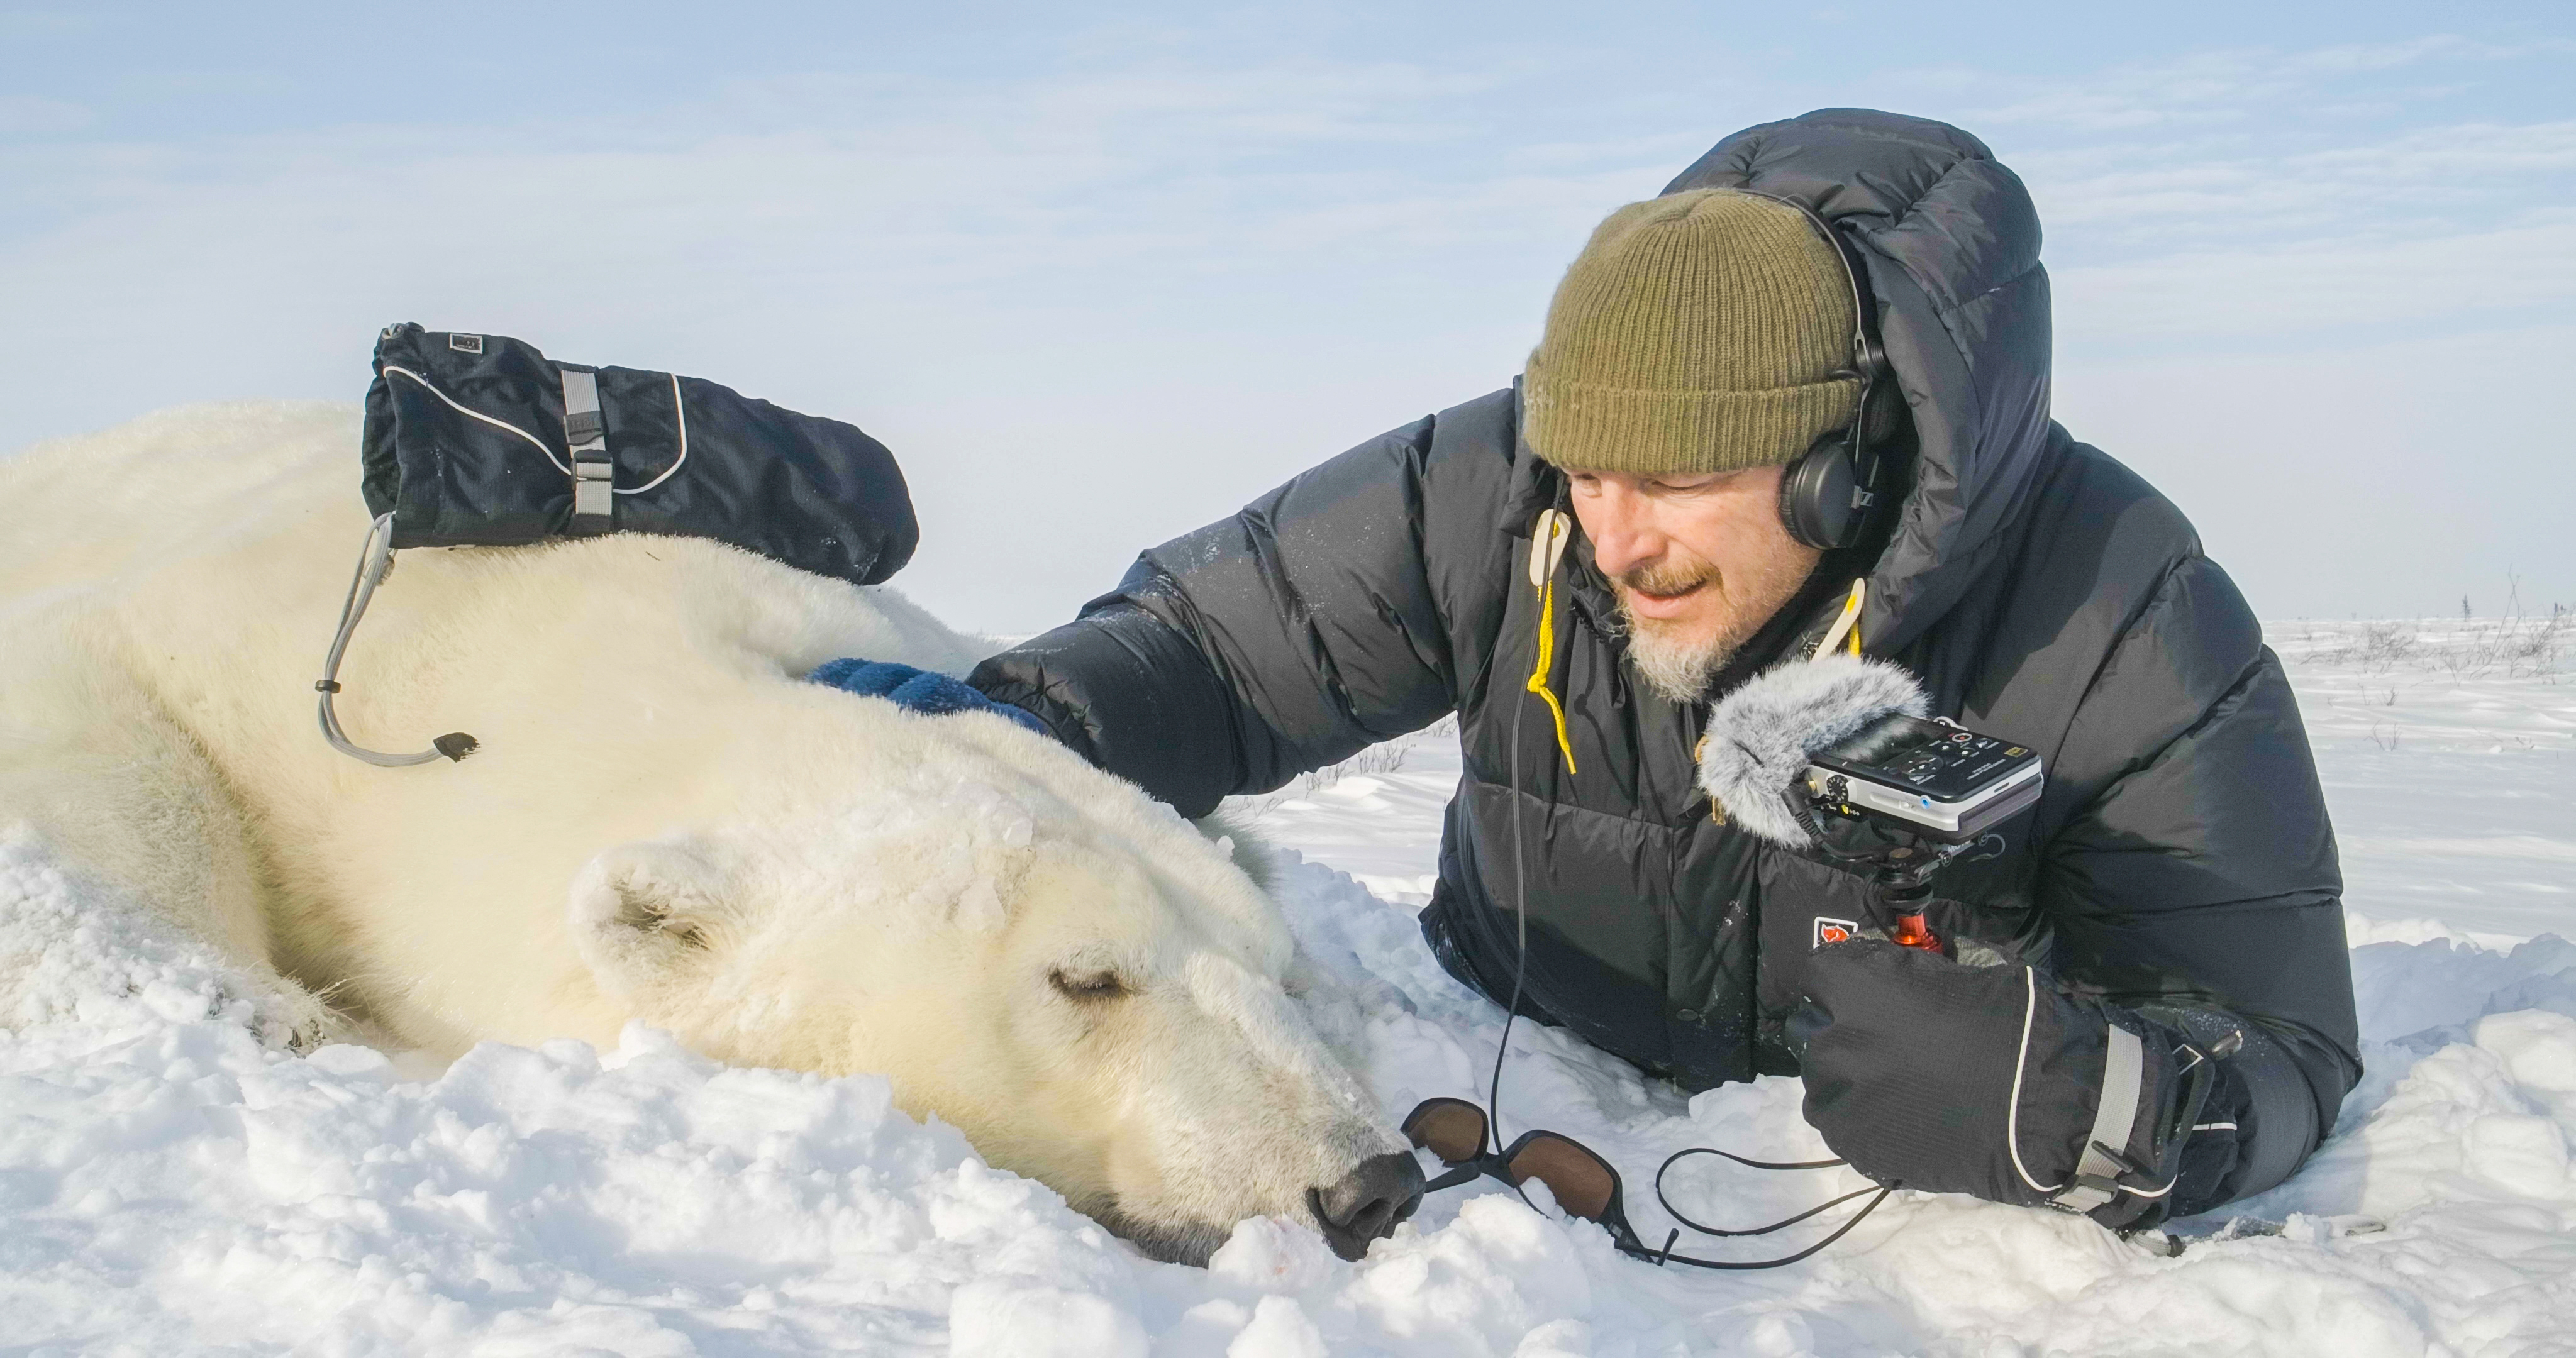 KUOW - The polar bears of Hudson Bay: cubs, climate, and calories, part 1